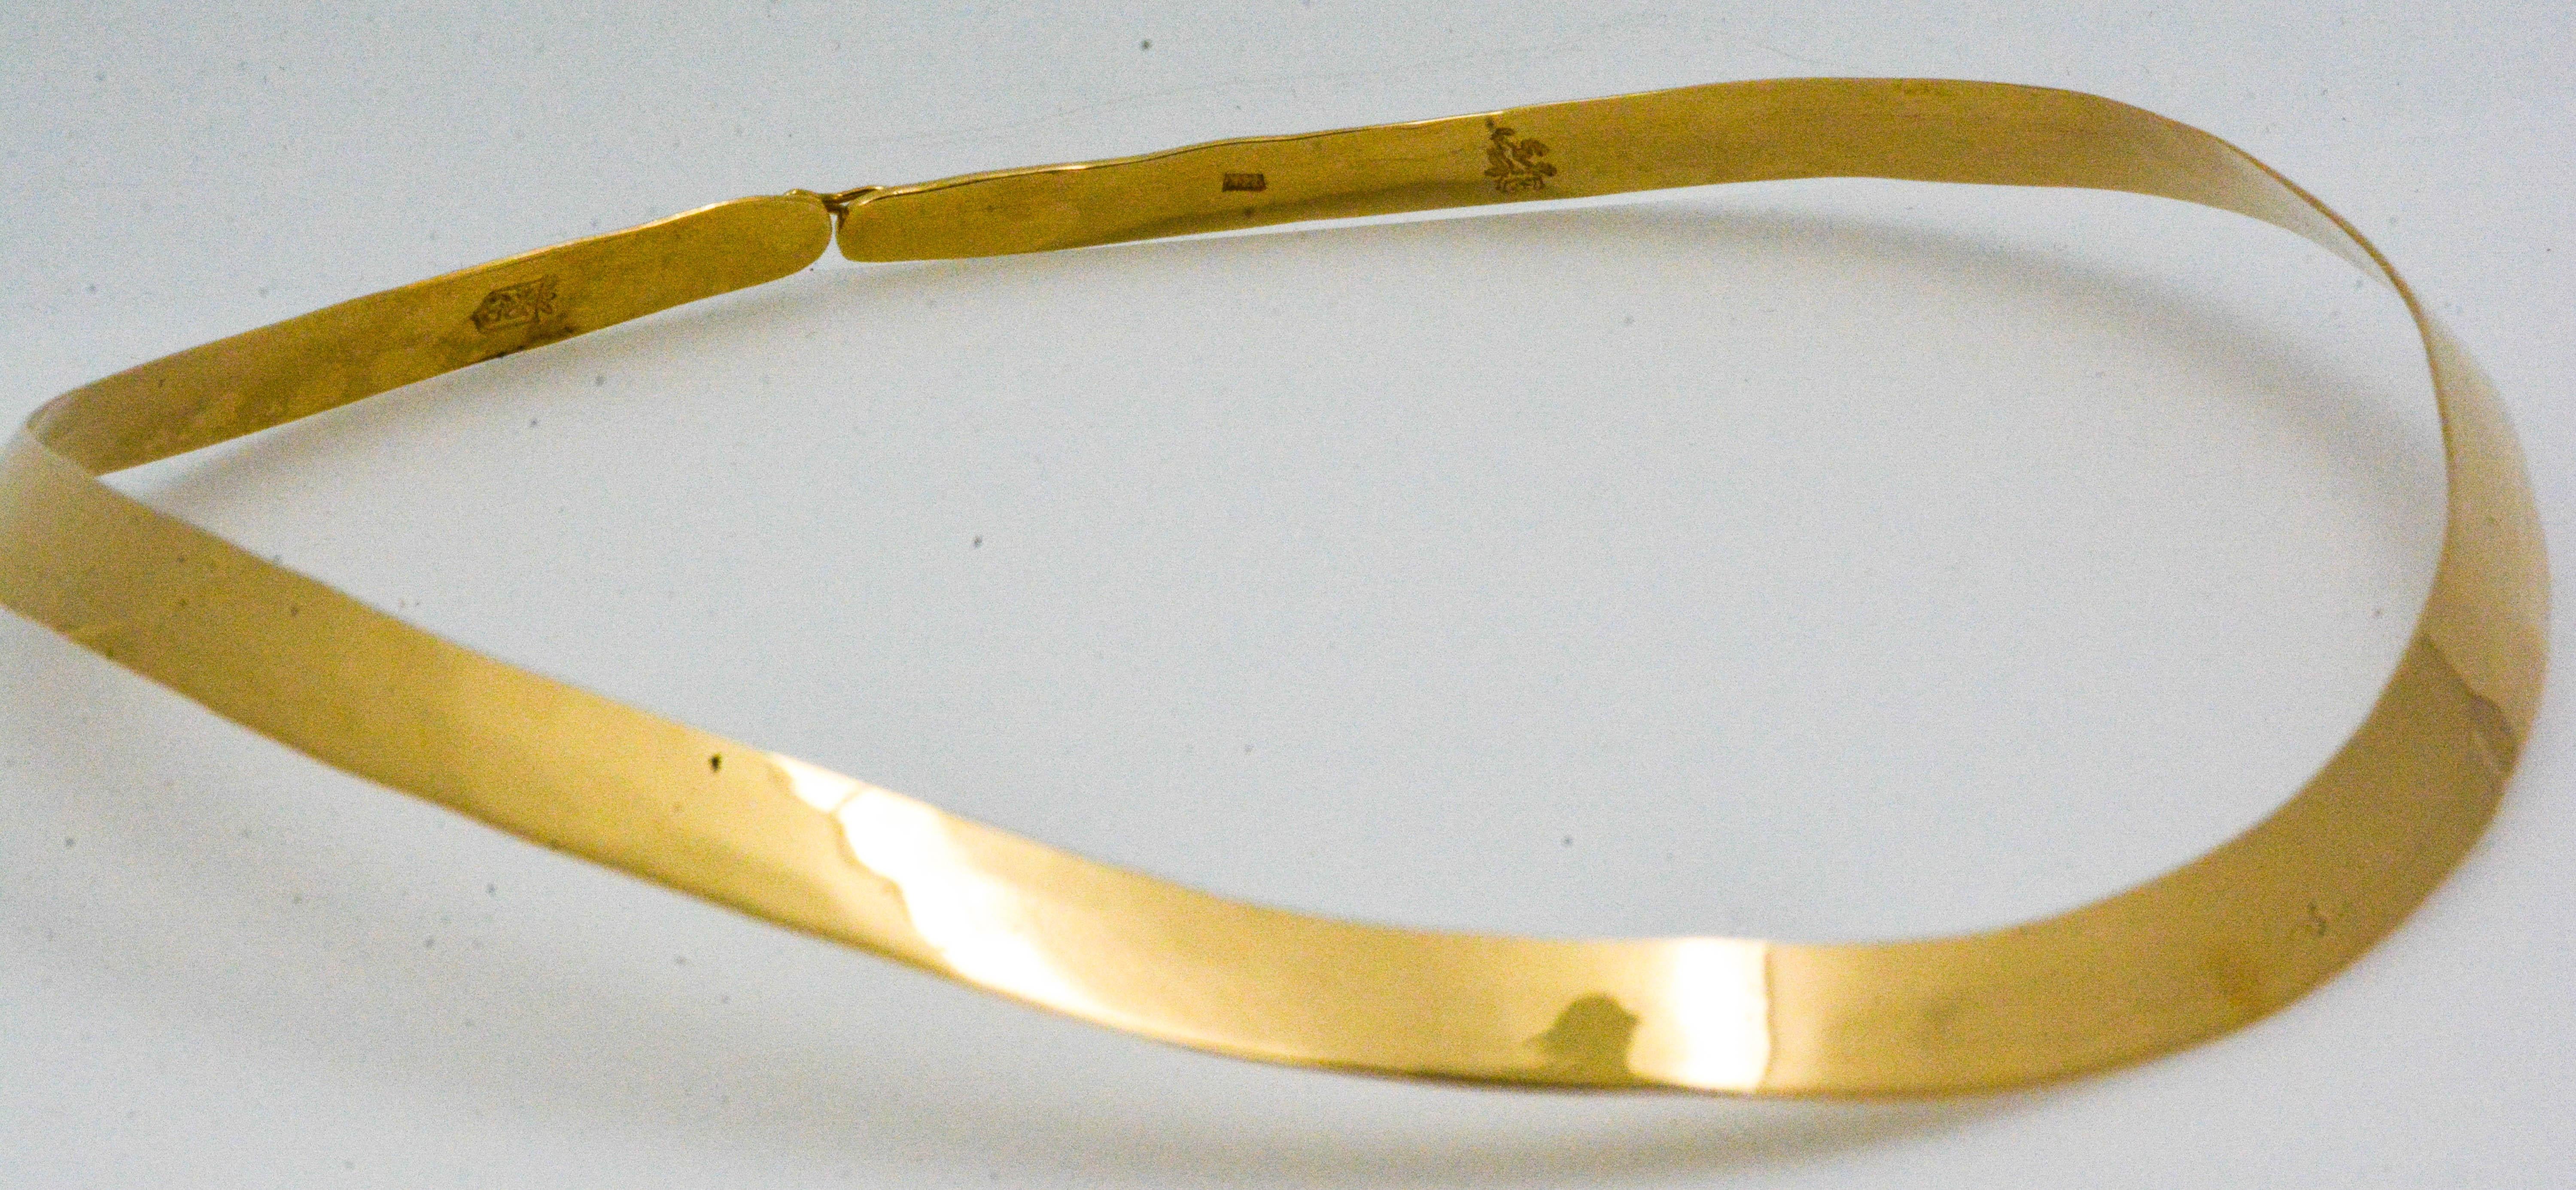 The magical elegance of 14 karat gold is captured in this handmade hammered finish collar necklace. Measuring 7.24 mm wide, this admirable flat wire collar is lightweight and extremely comfortable. Glistening 14 karat yellow gold will enhance any